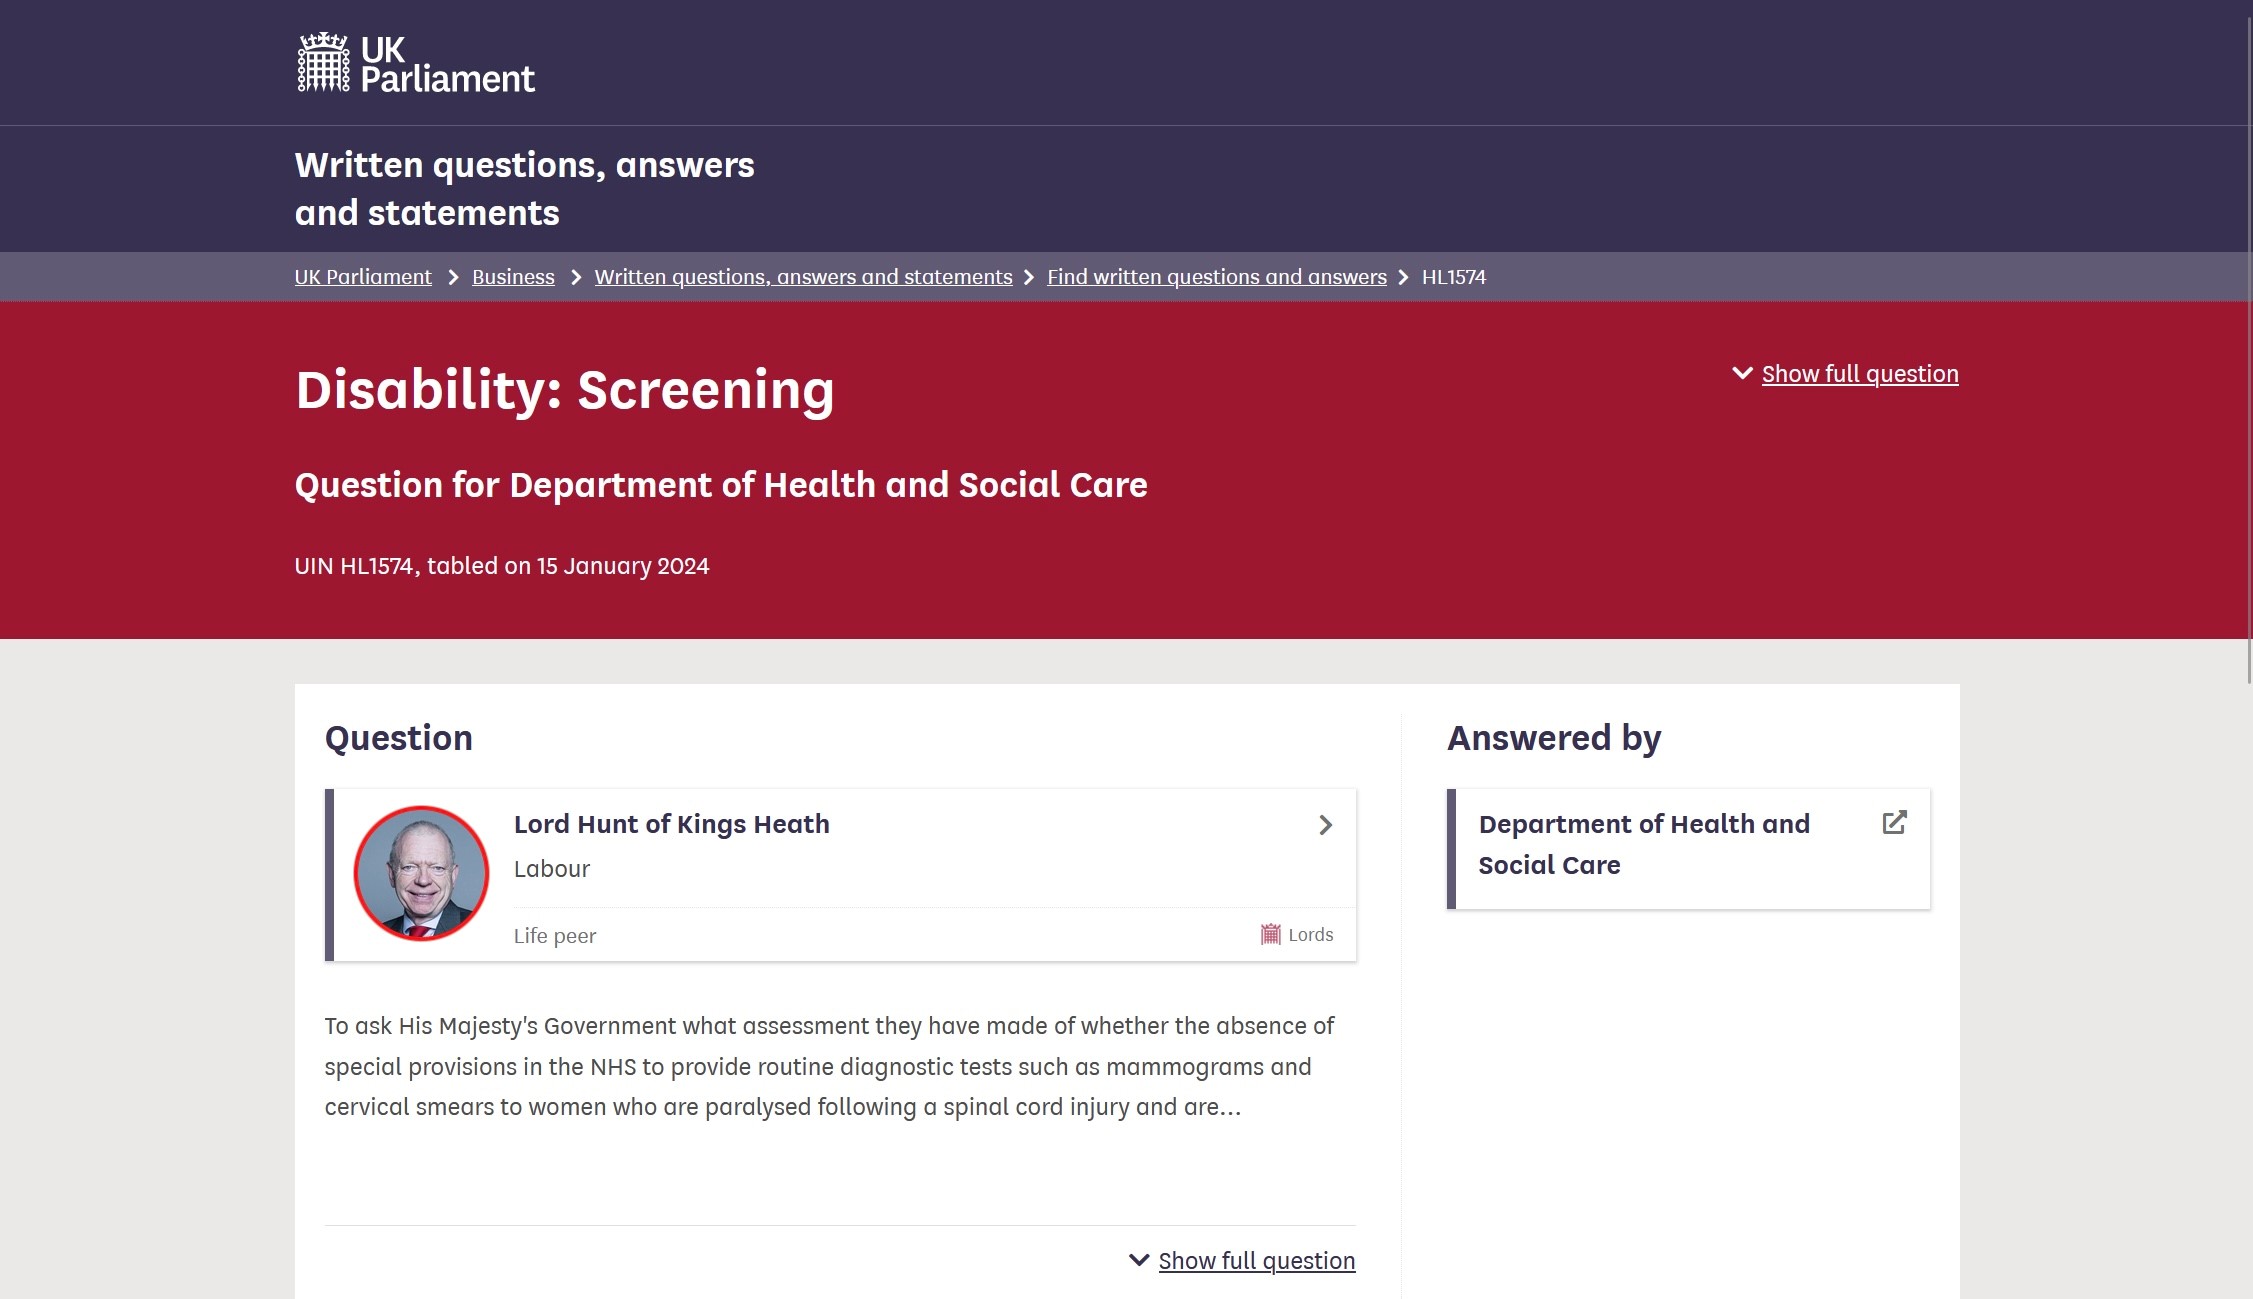 Screenshot of UK Parliament website showing written questions, answers and statements with the heading Disability: Screening